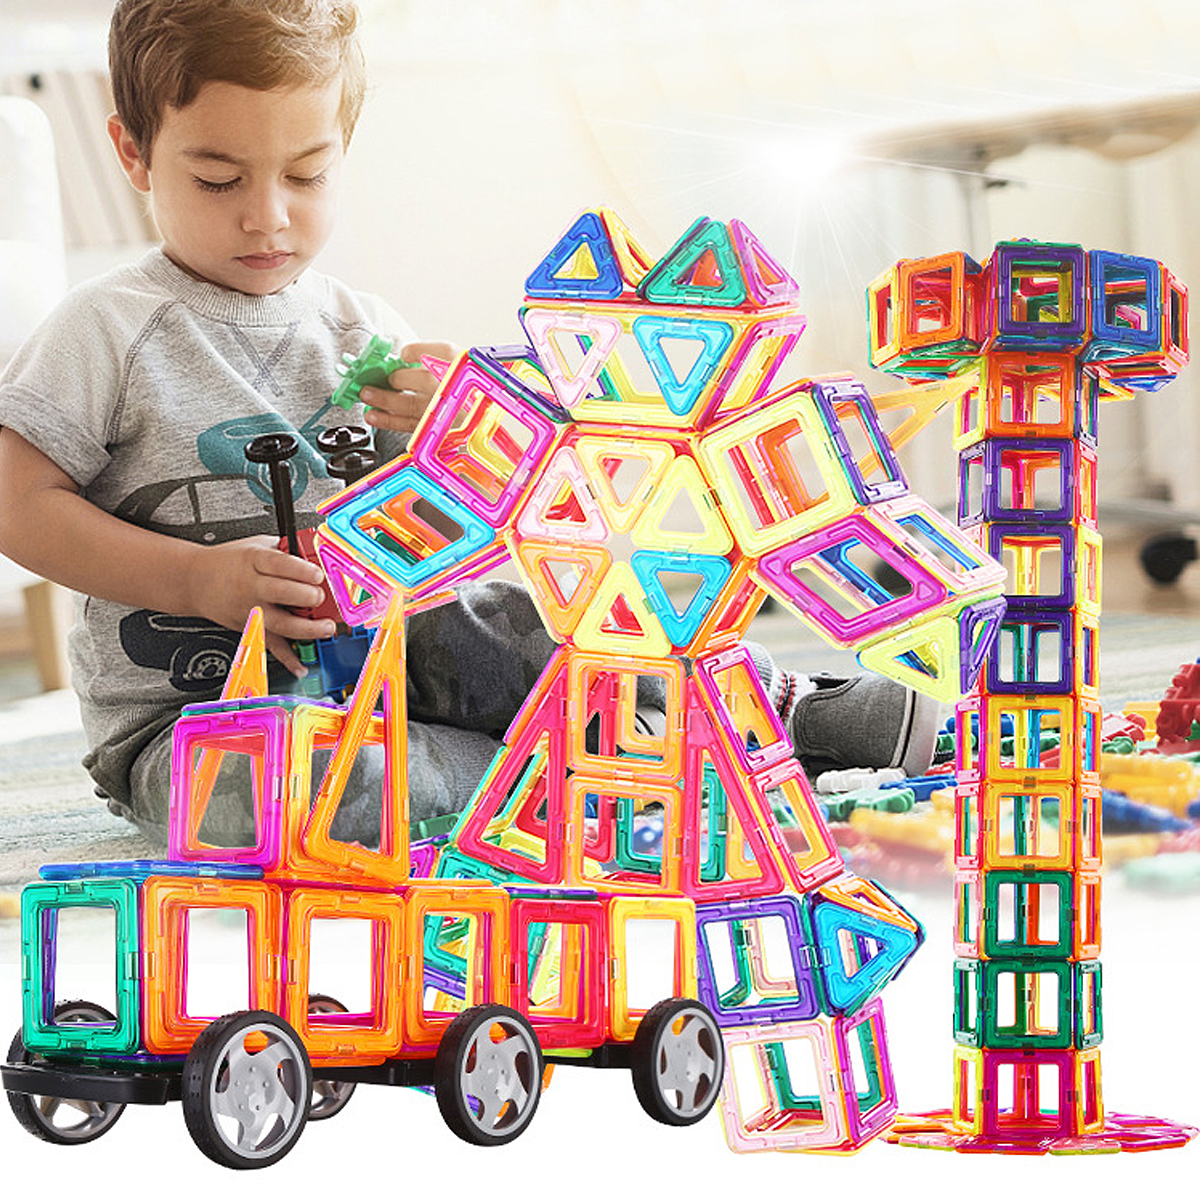 113-Pieces-Kids-Magnetic-Toys-Magnet-Tiles-Kits-Blocks-Building-Toys-For-Boys-Girls-1384002